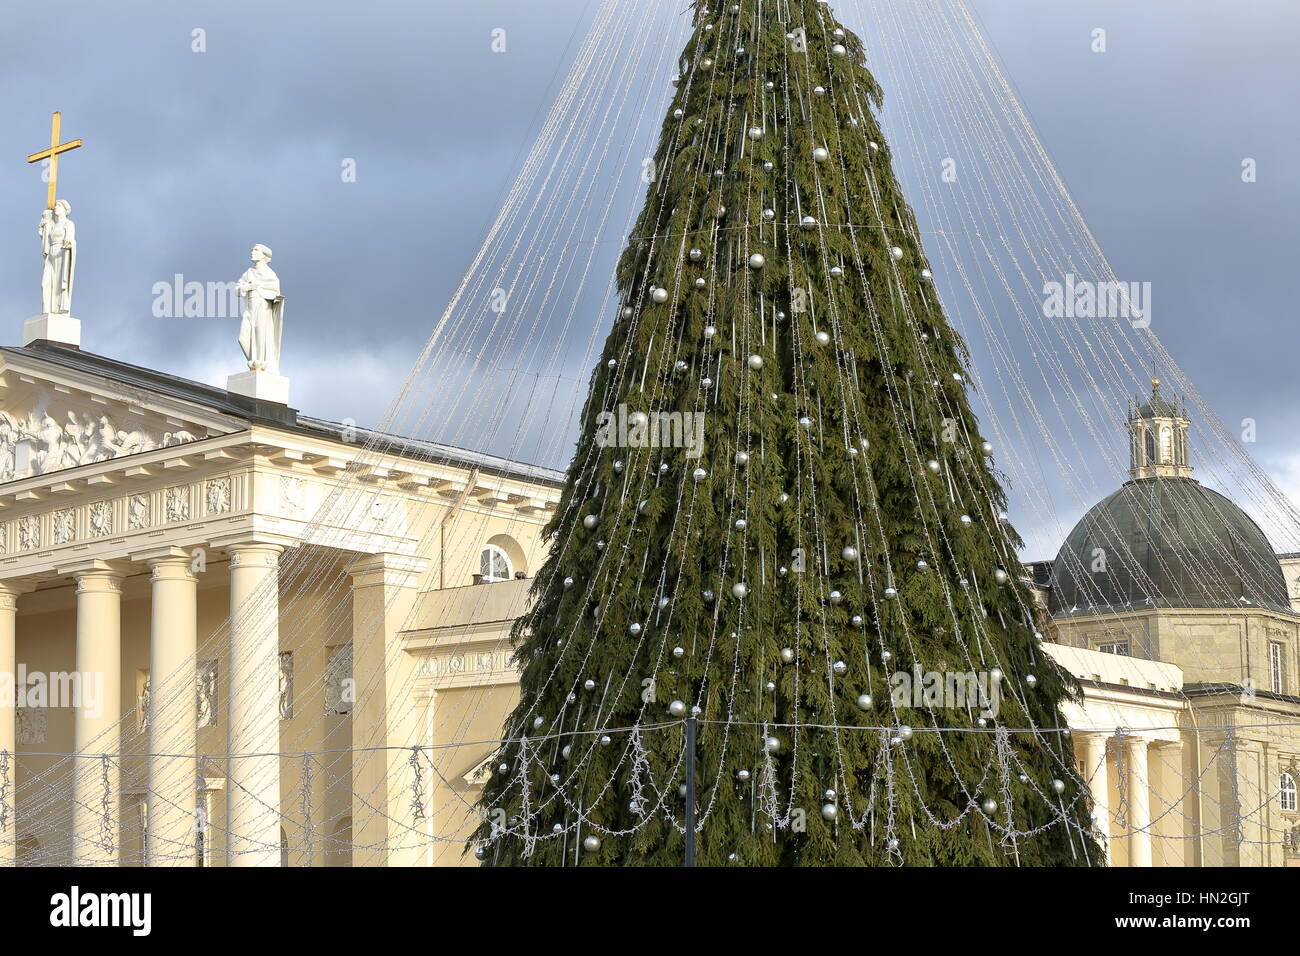 VILNIUS, LITHUANIA: The Cathedral and the Palace of the Grand Dukes of Lithuania on Cathedral Square with a Christmas tree in the foreground Stock Photo